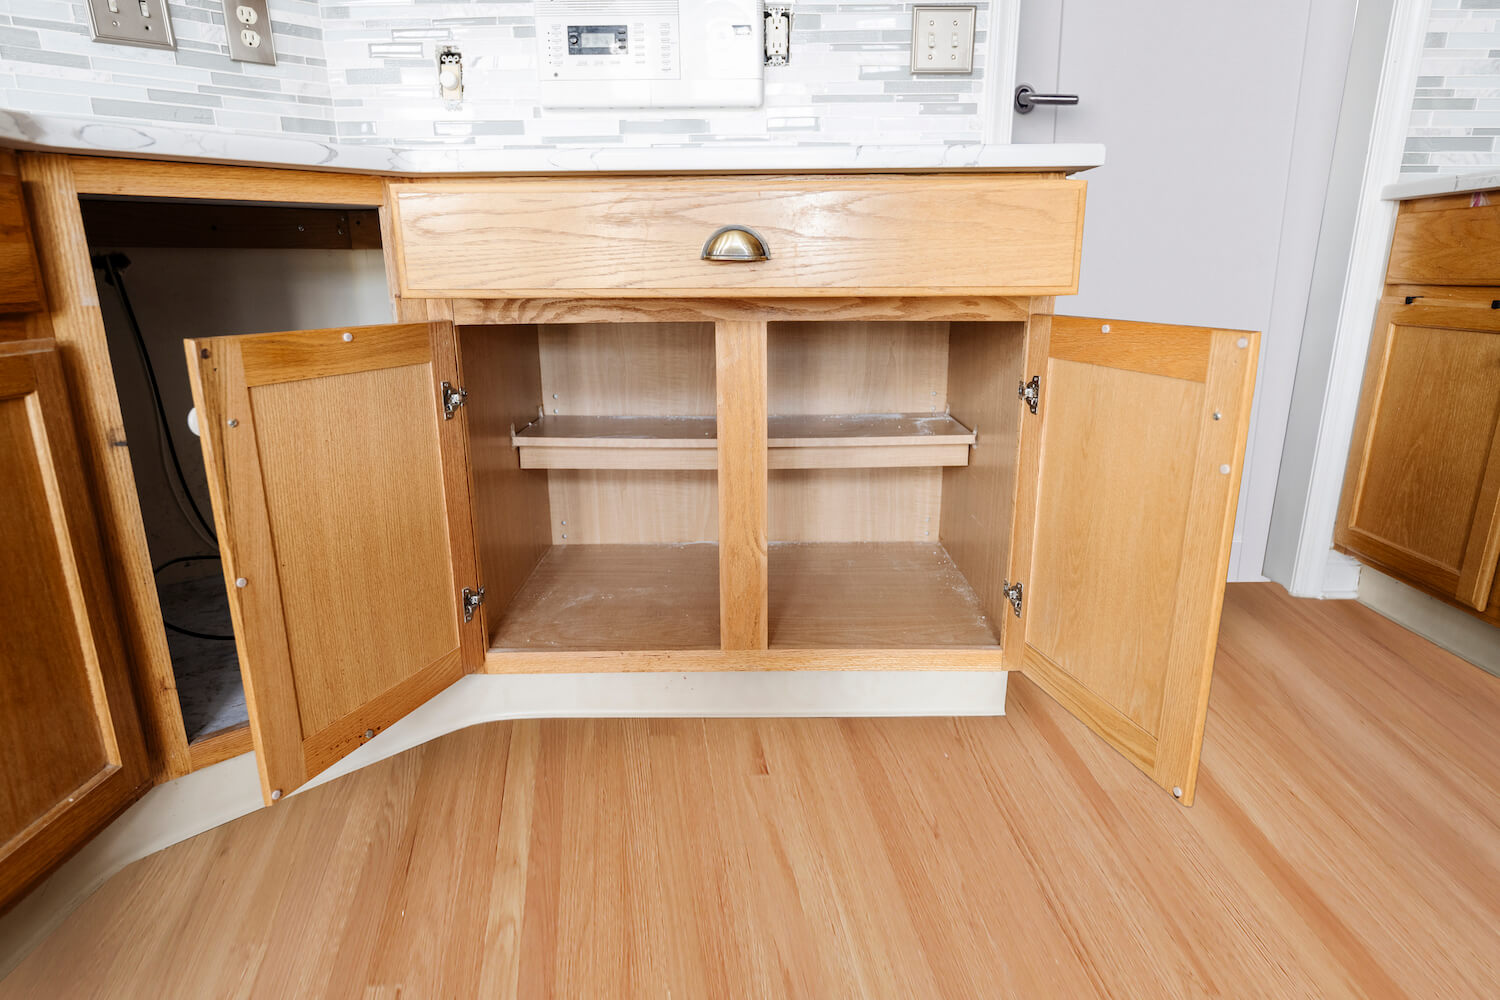 Kitchen Cabinet Storage Solutions  N-Hance Wood Refinishing of Low Country